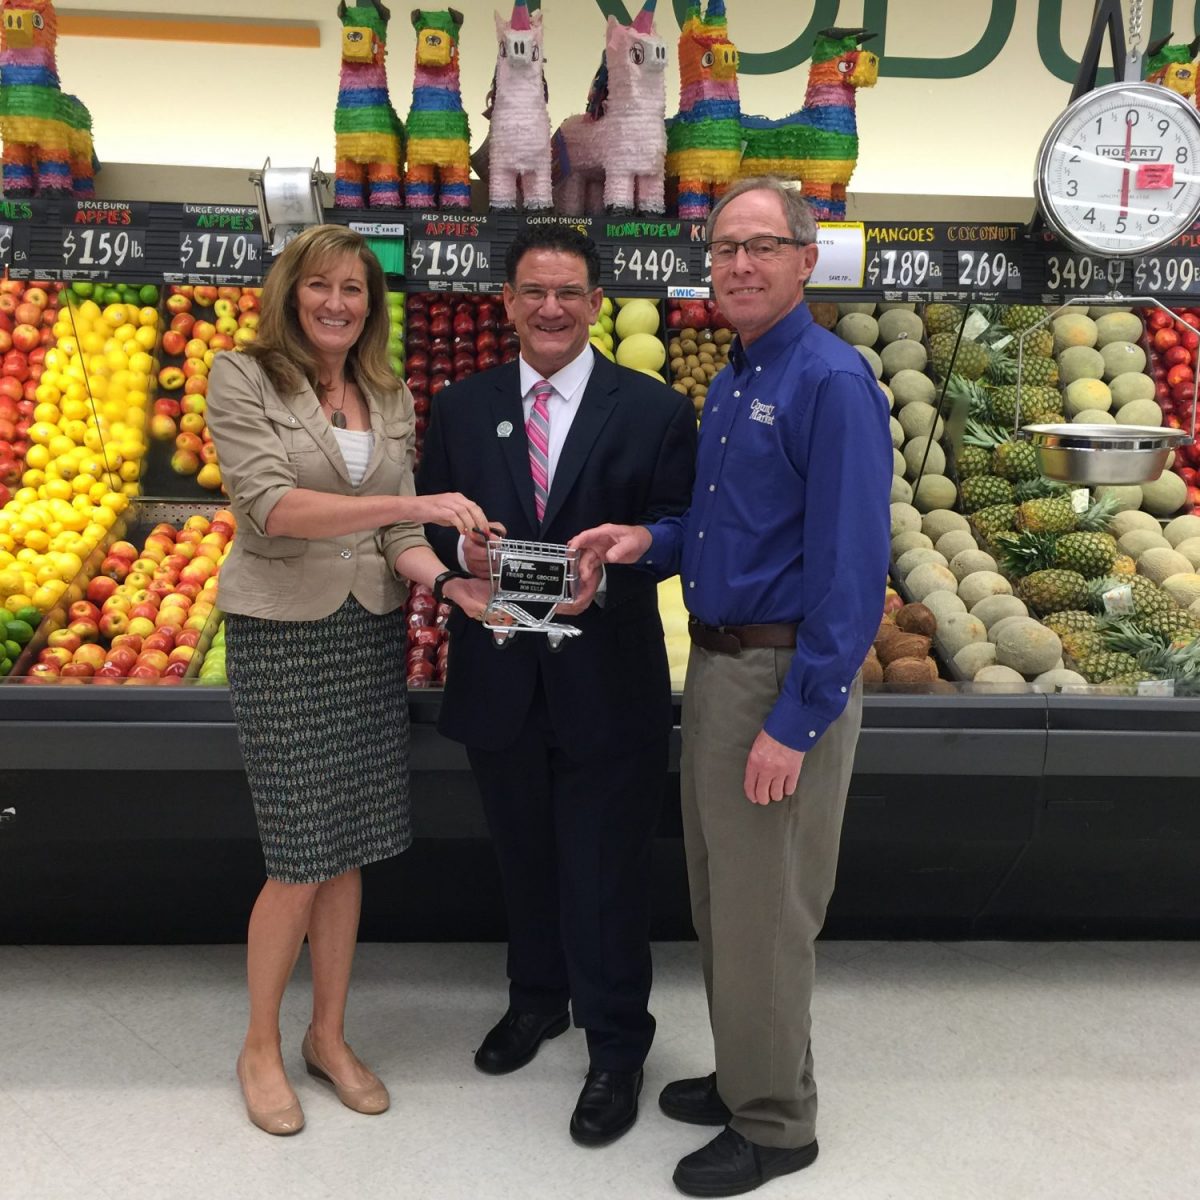 Representative Kulp was presented with the Friend of Grocers Award from the Wisconsin Grocers Association at Kramer’s County Market in Abbotsford. Pictured are: Michelle Kussow, WGA; Kulp; Dennis Kramer, Kramer's County Market. Submitted photo.